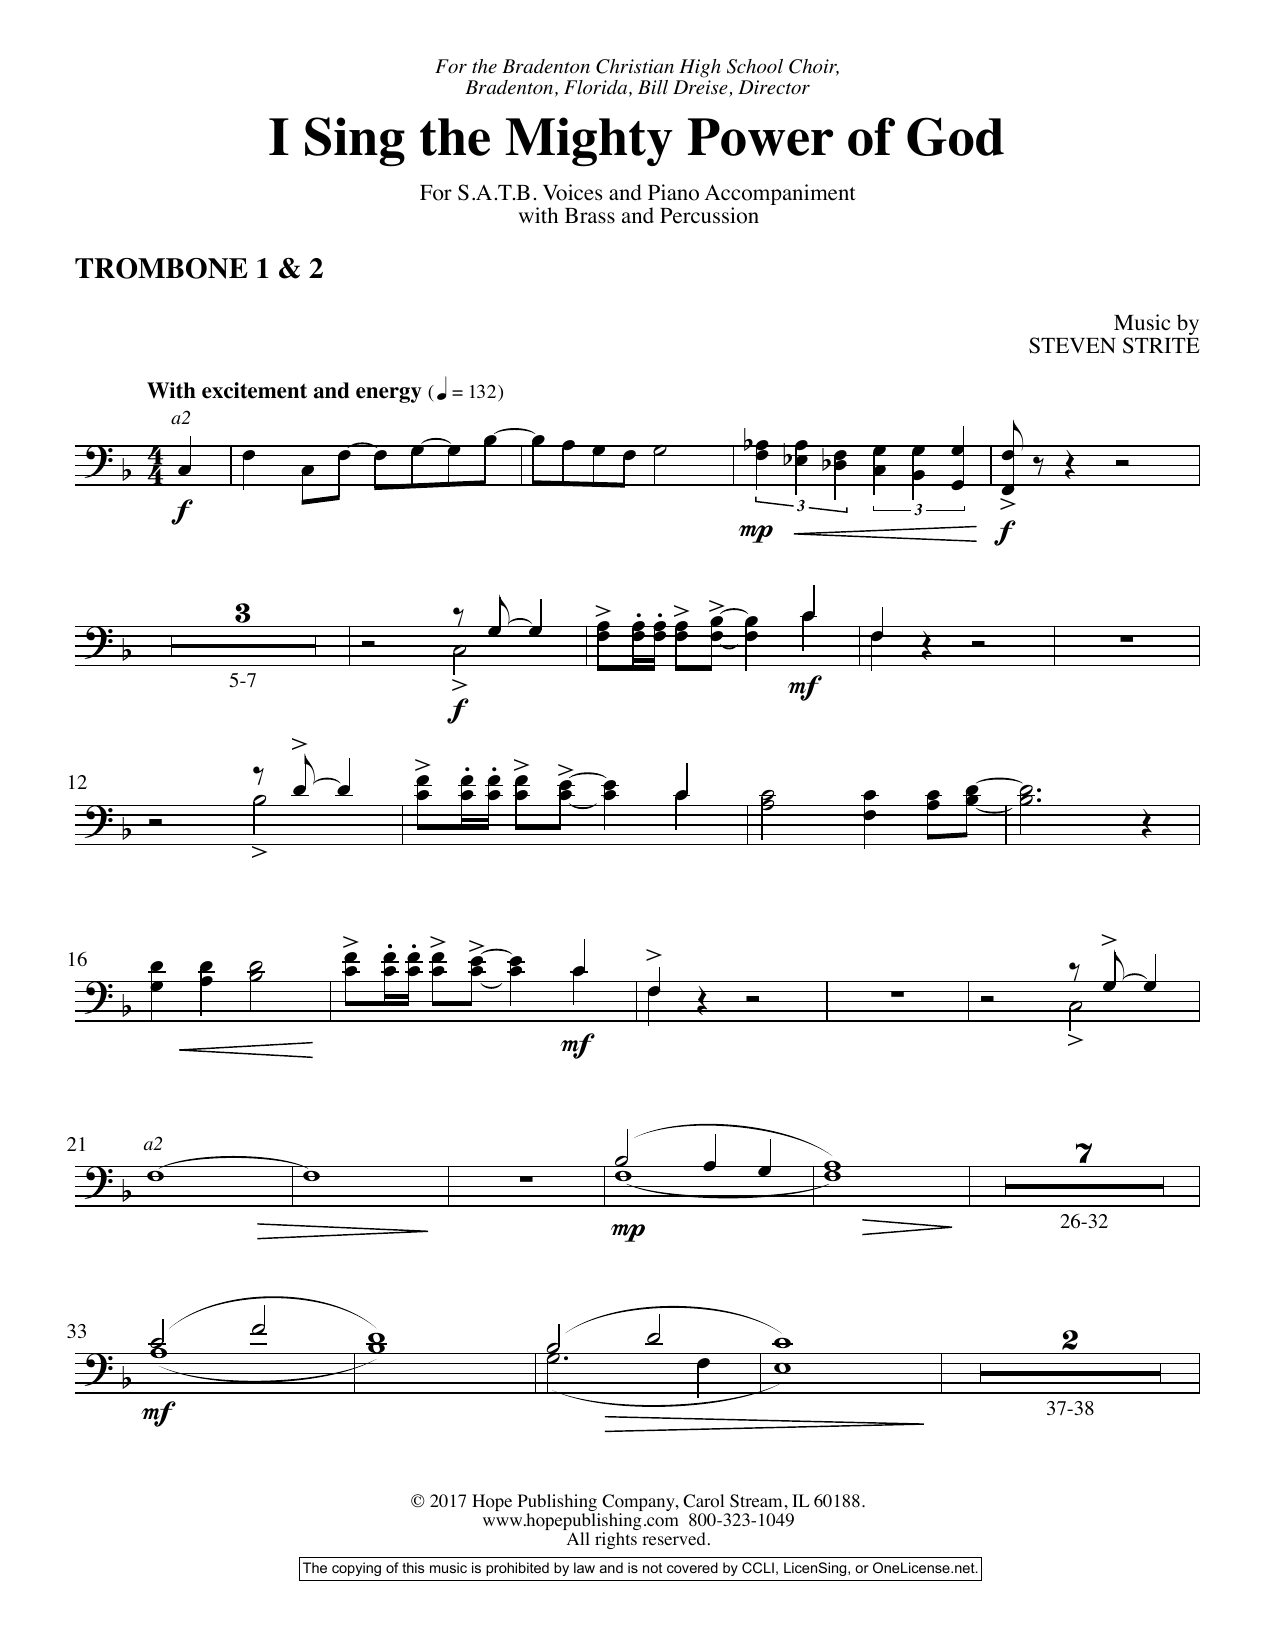 Download Steven Strite I Sing the Mighty Power of God - Trombo Sheet Music